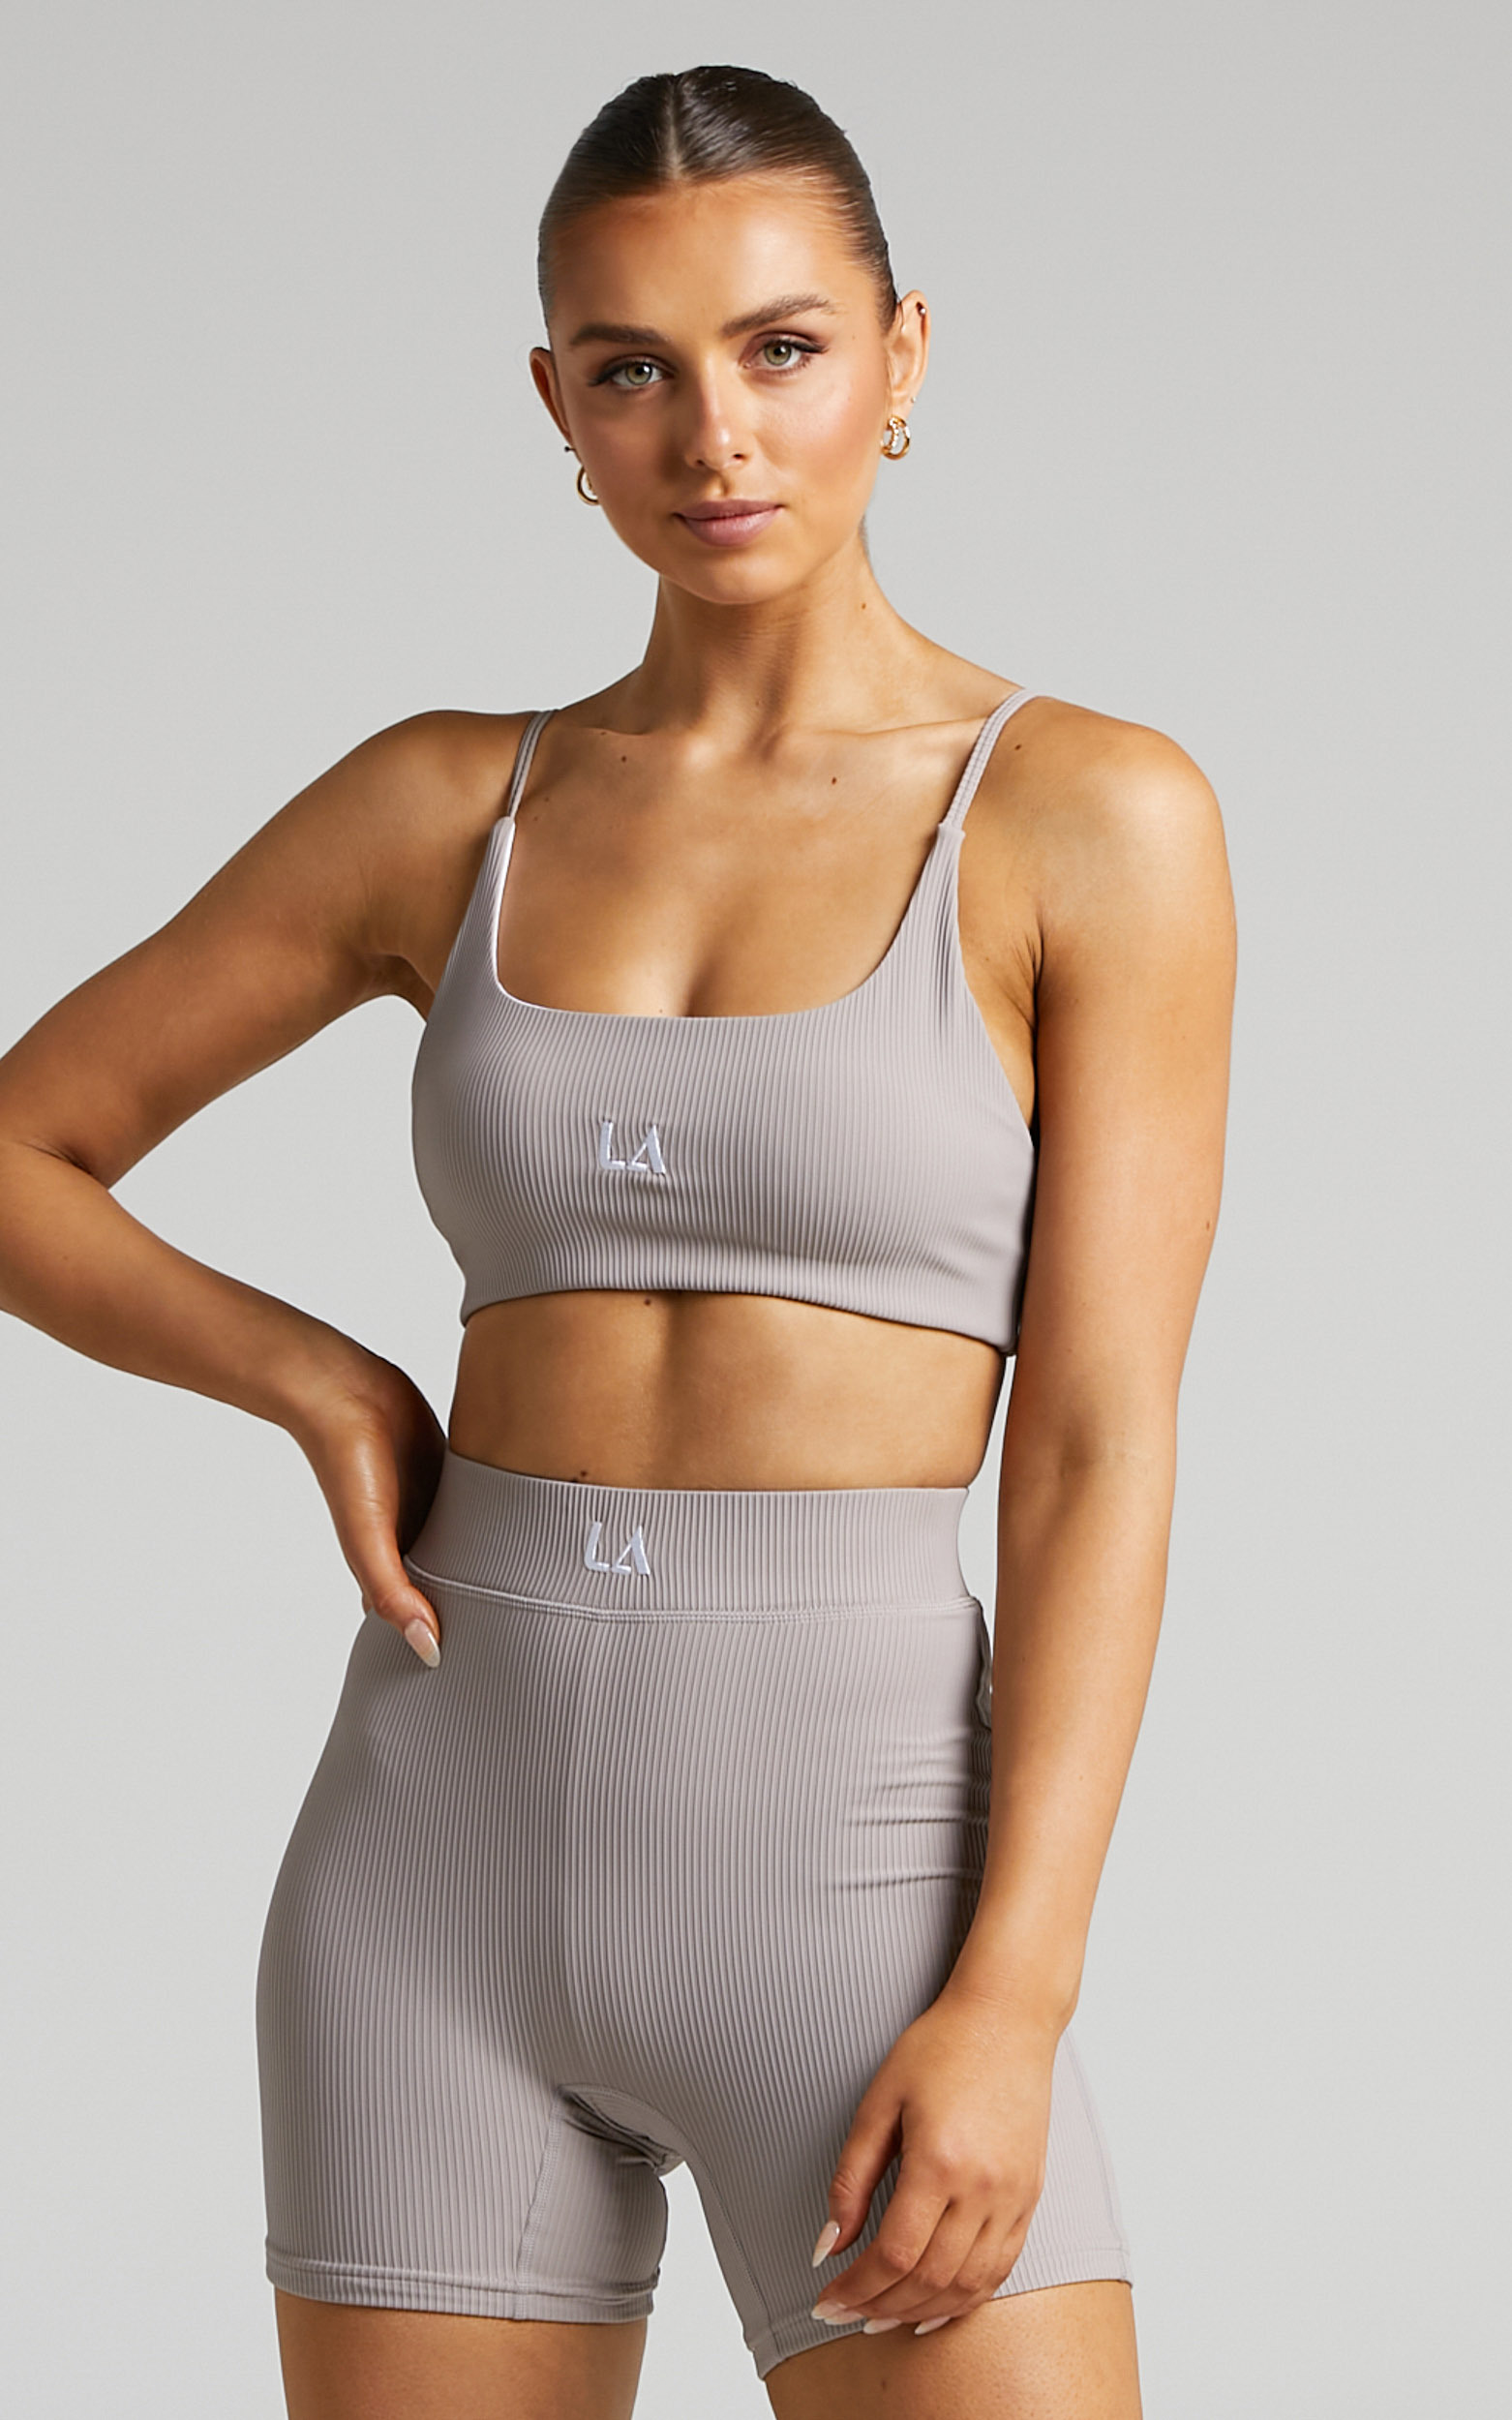 Lahana - Mabel Crop Top in STONE GREY - L, GRY1, hi-res image number null